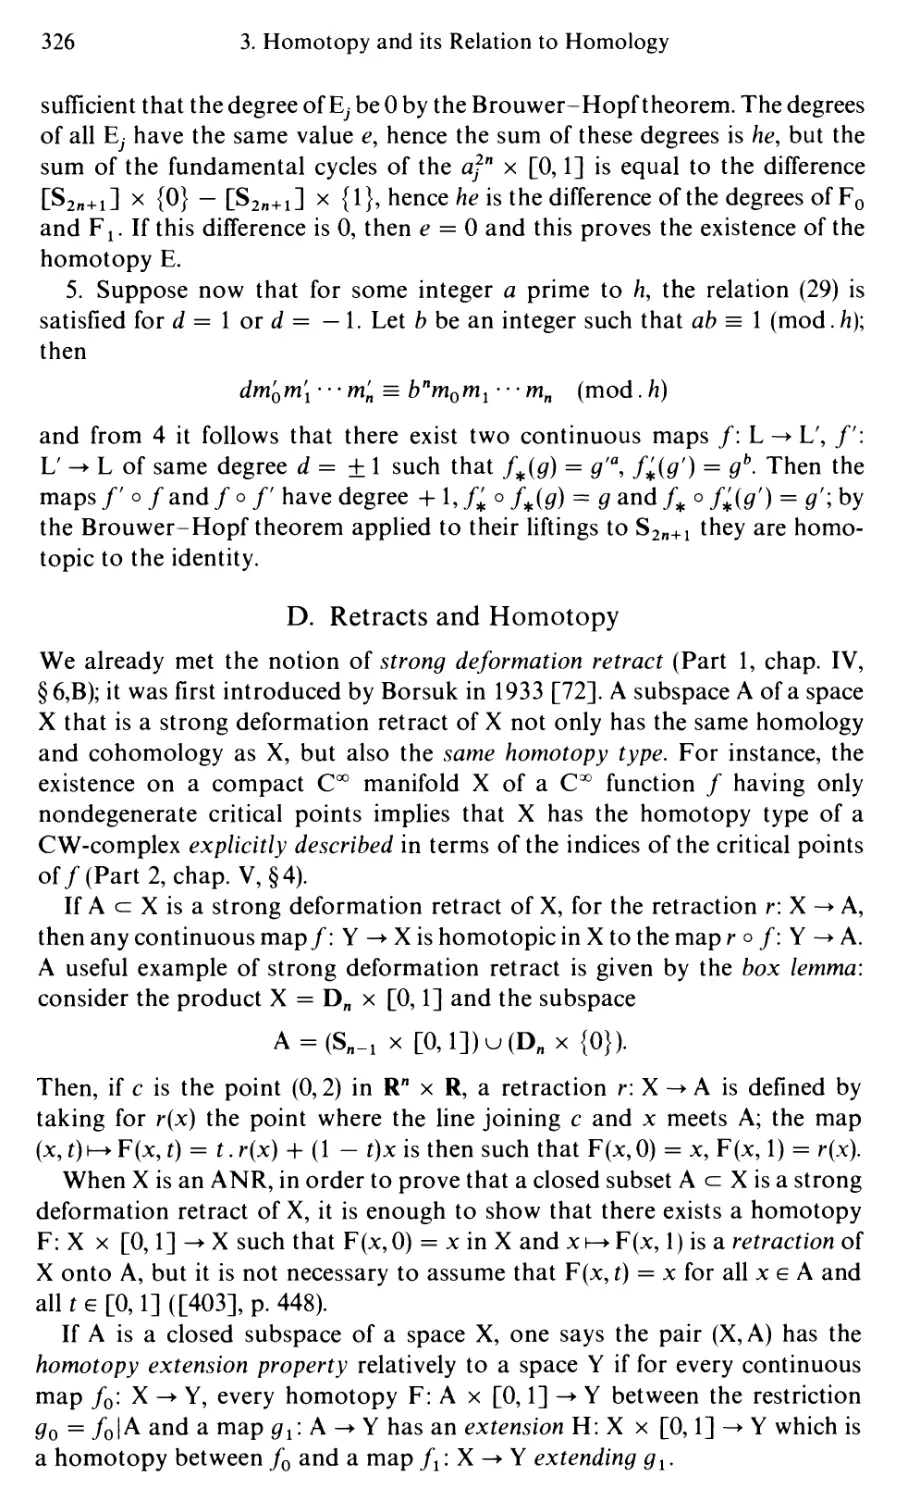 D. Retracts and Homotopy